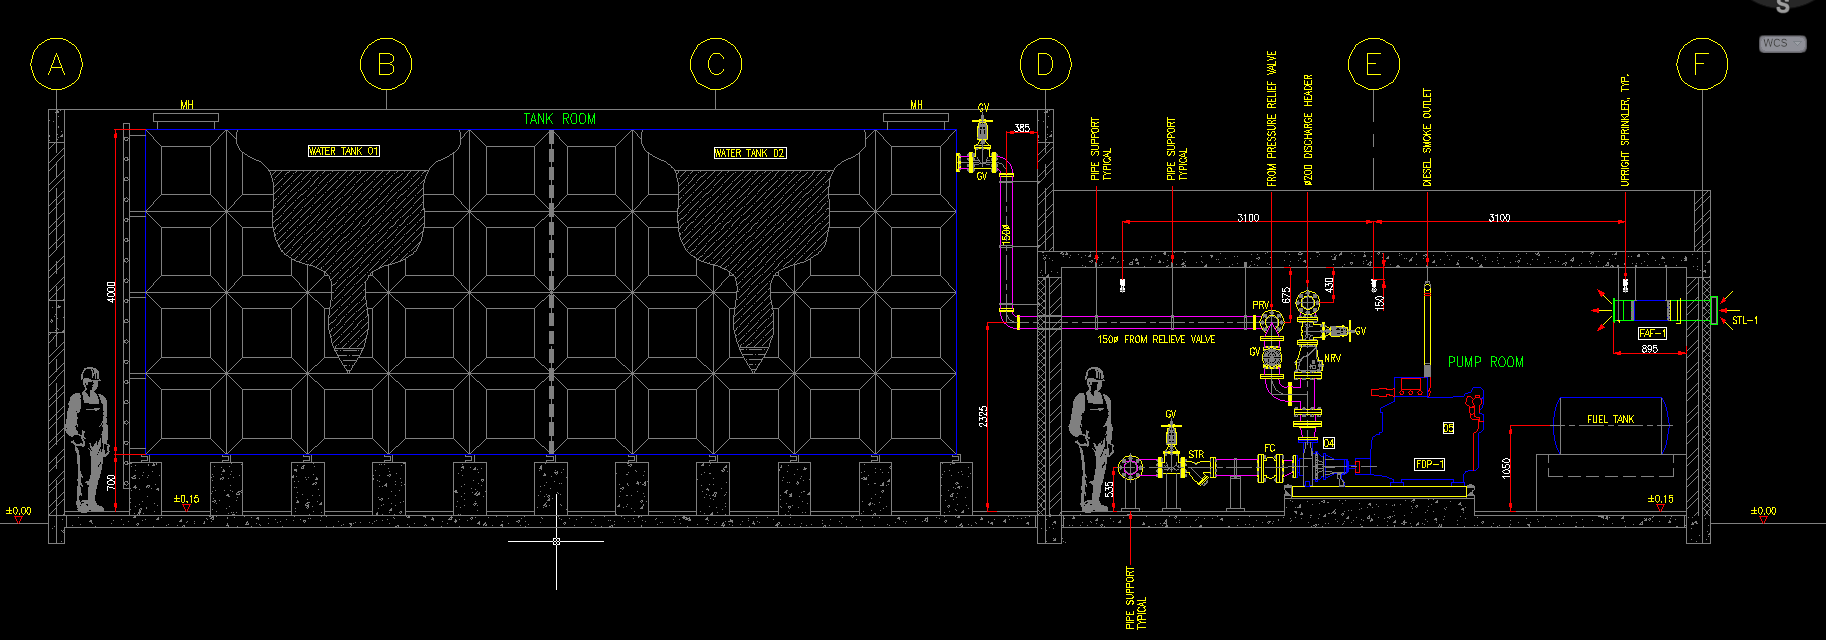 Fire hydrant symbol in autocad download